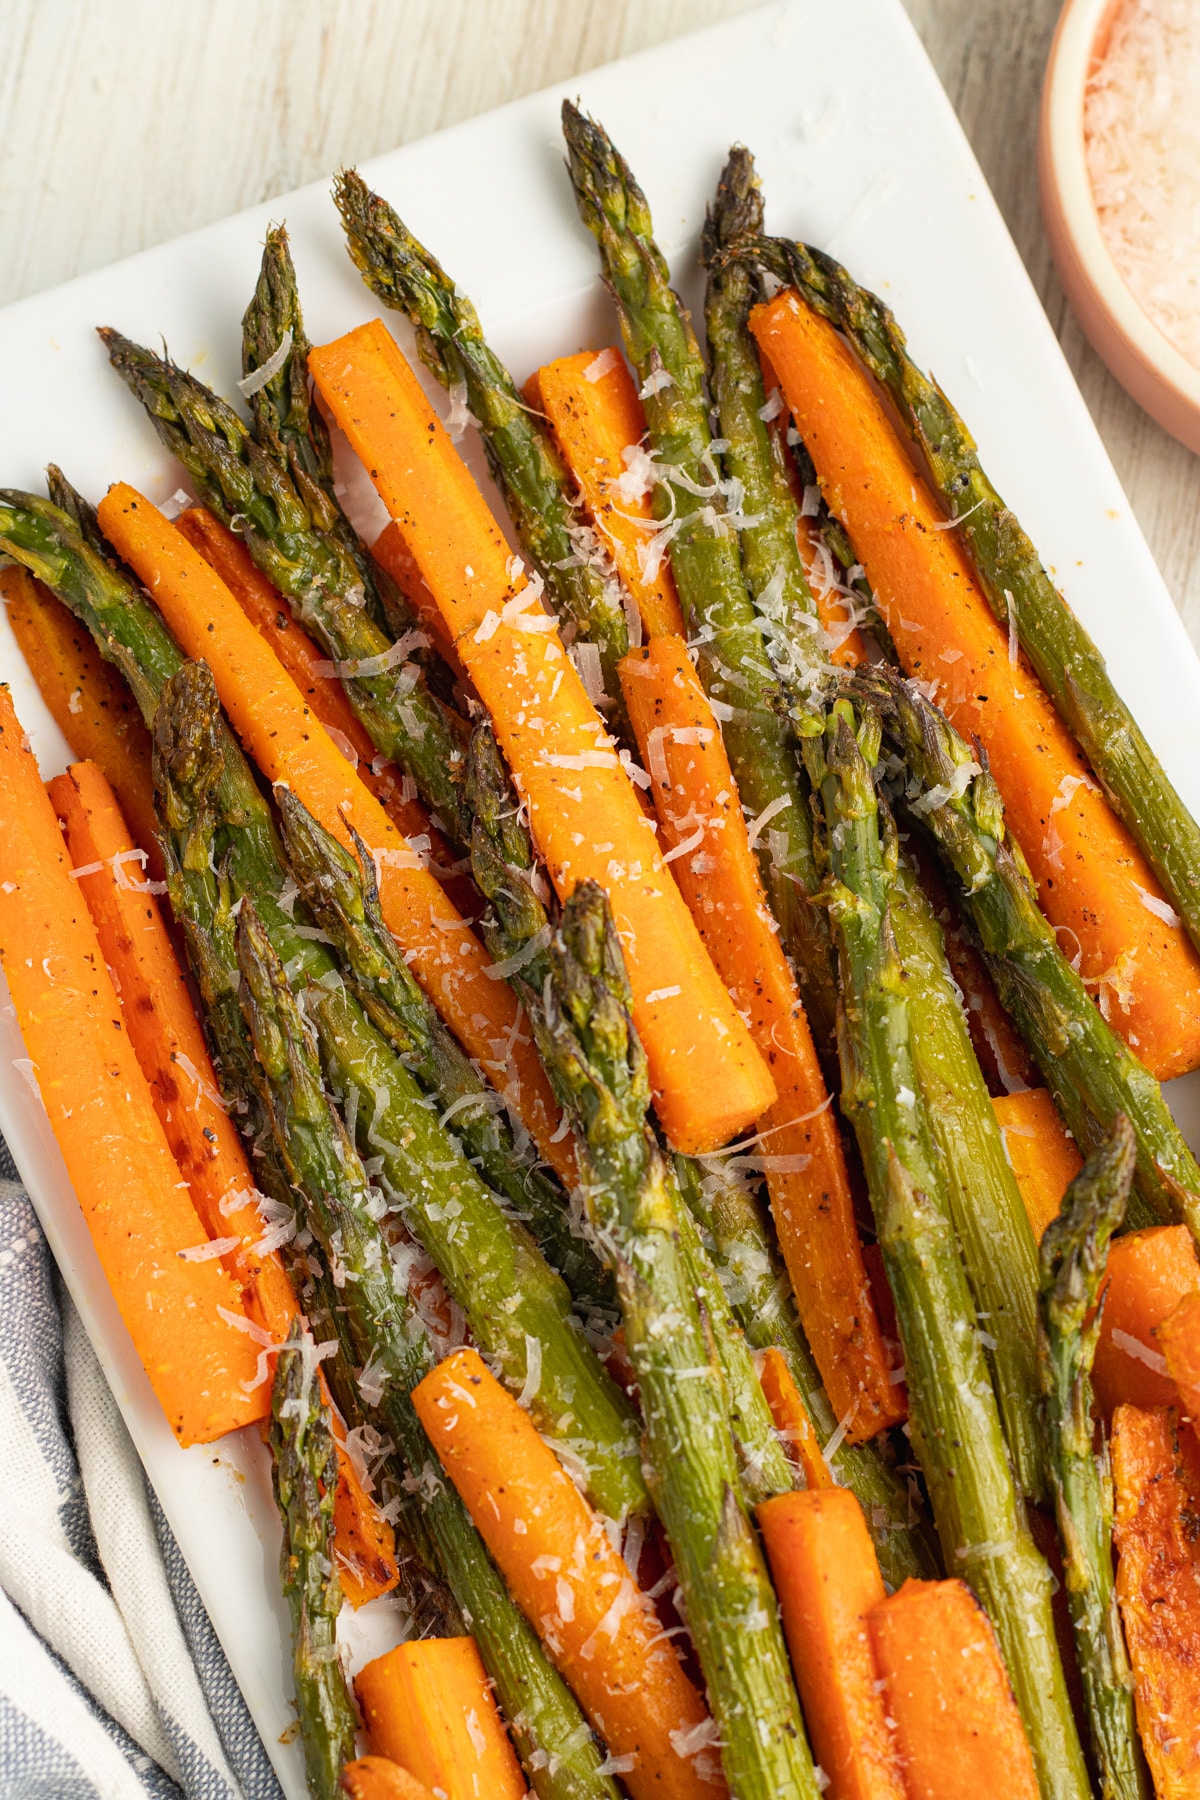 Picture close-up of carrots and asparagus. 